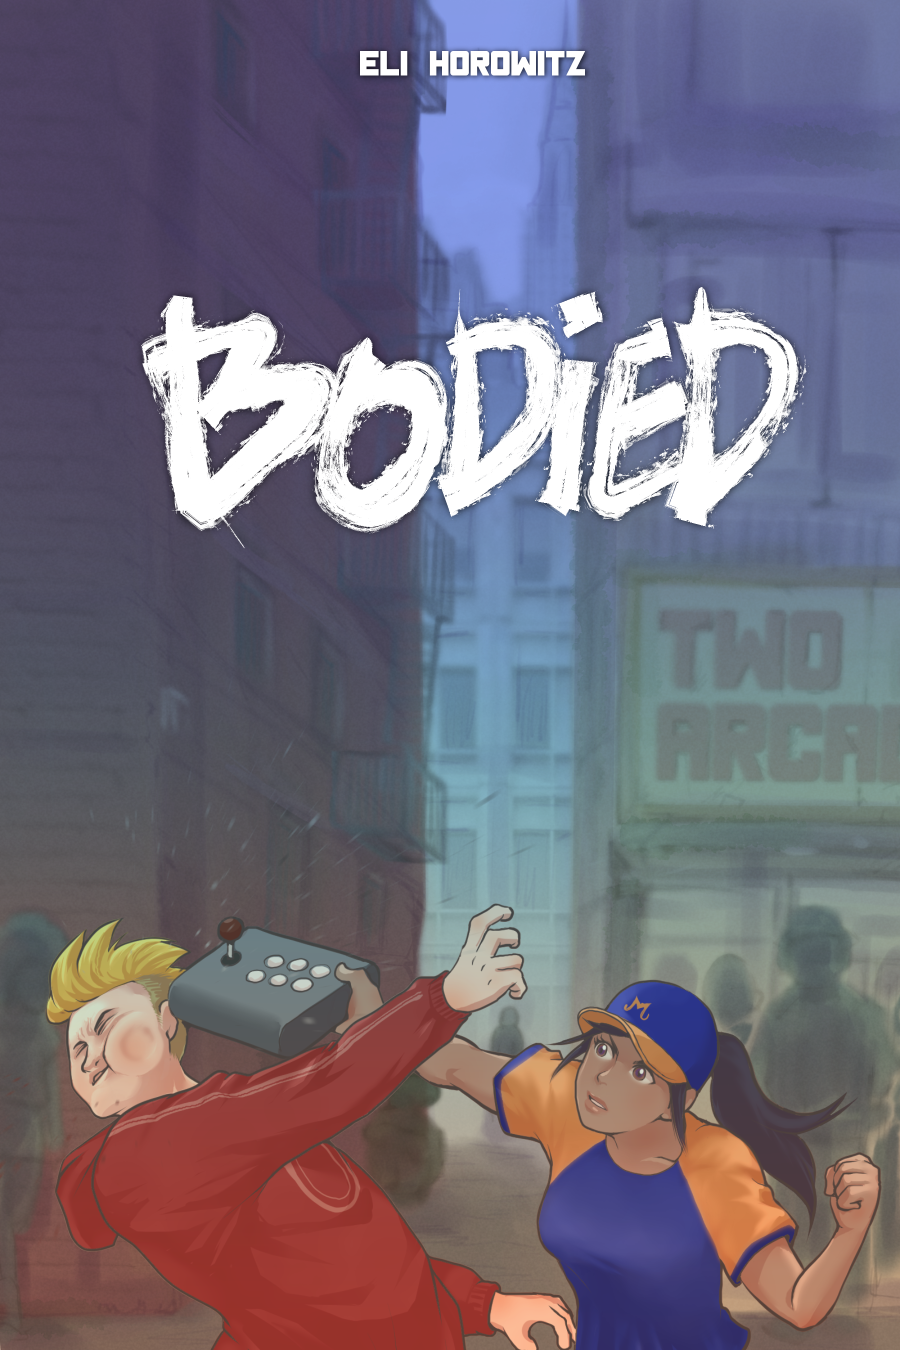 Cover art for the novel Bodied